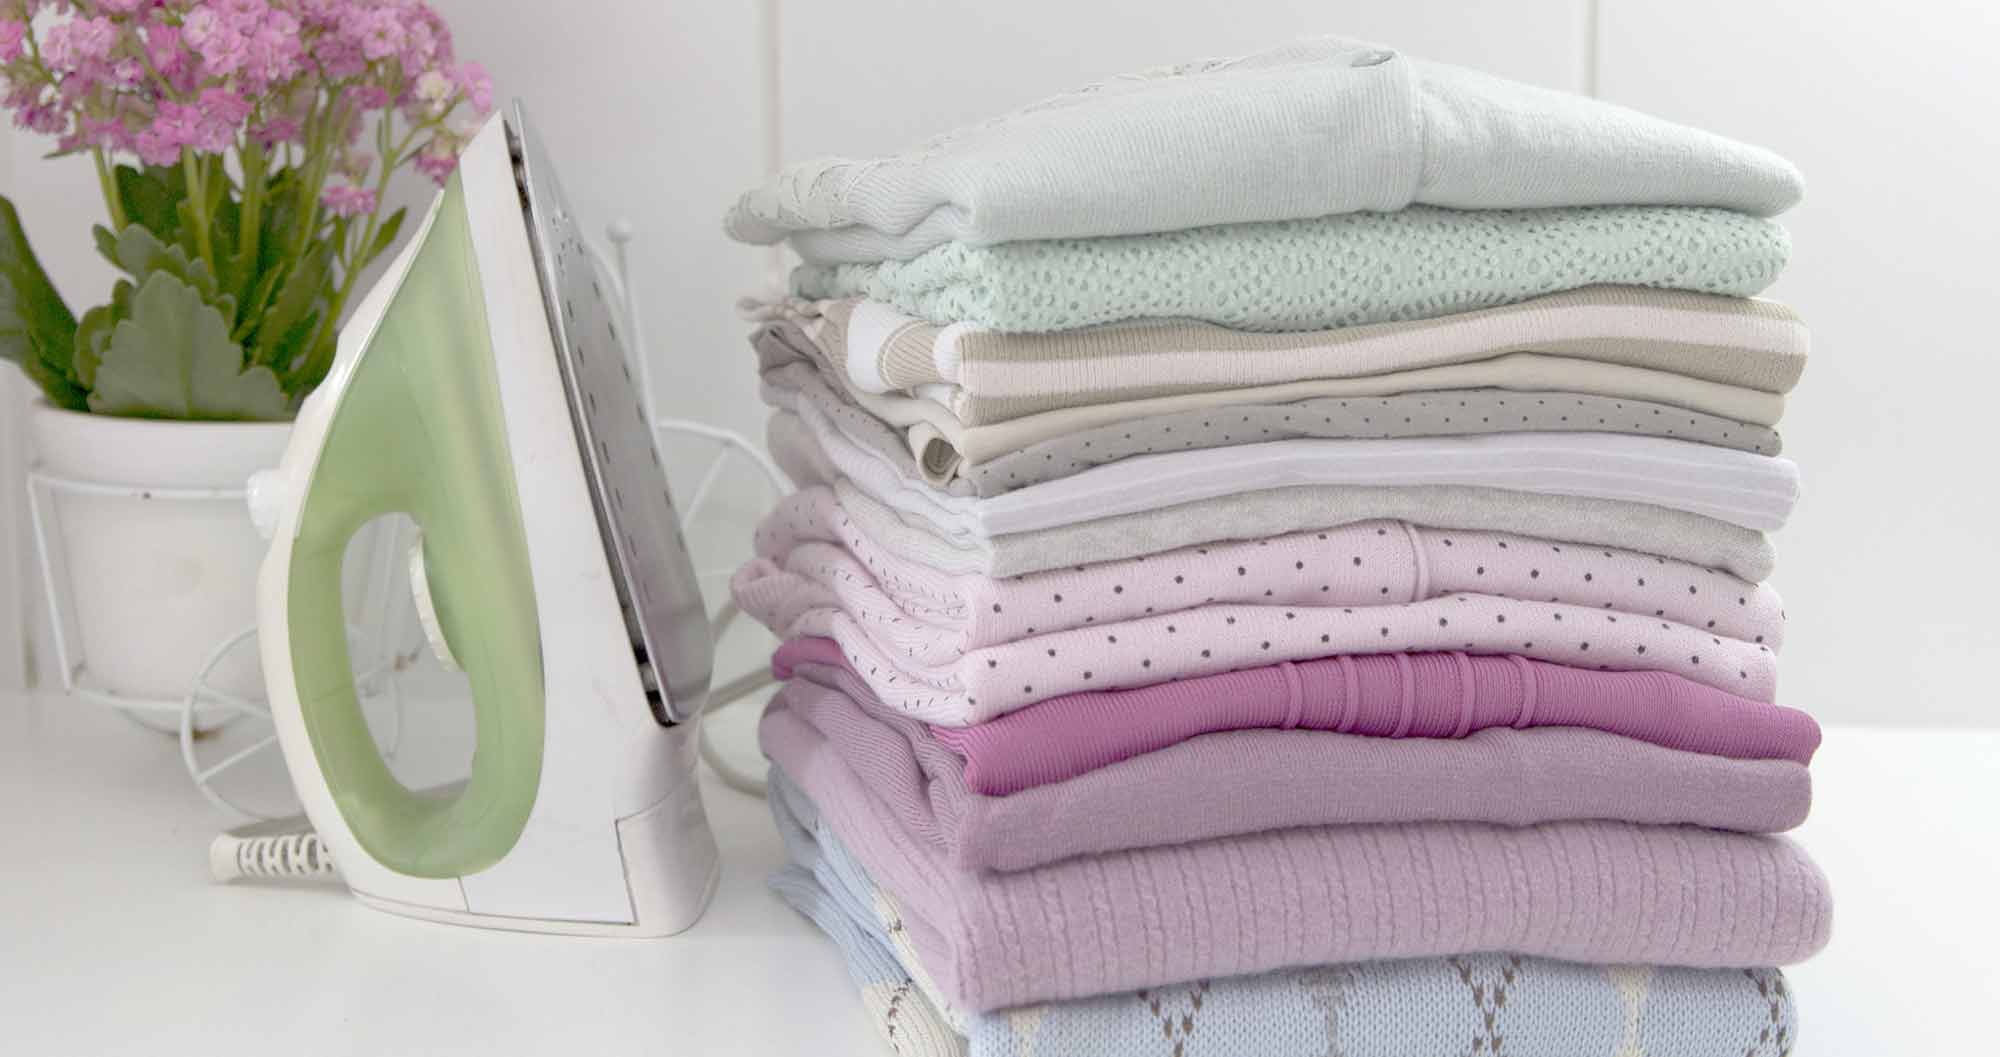 A stack of folded clothes next to an ironing board.